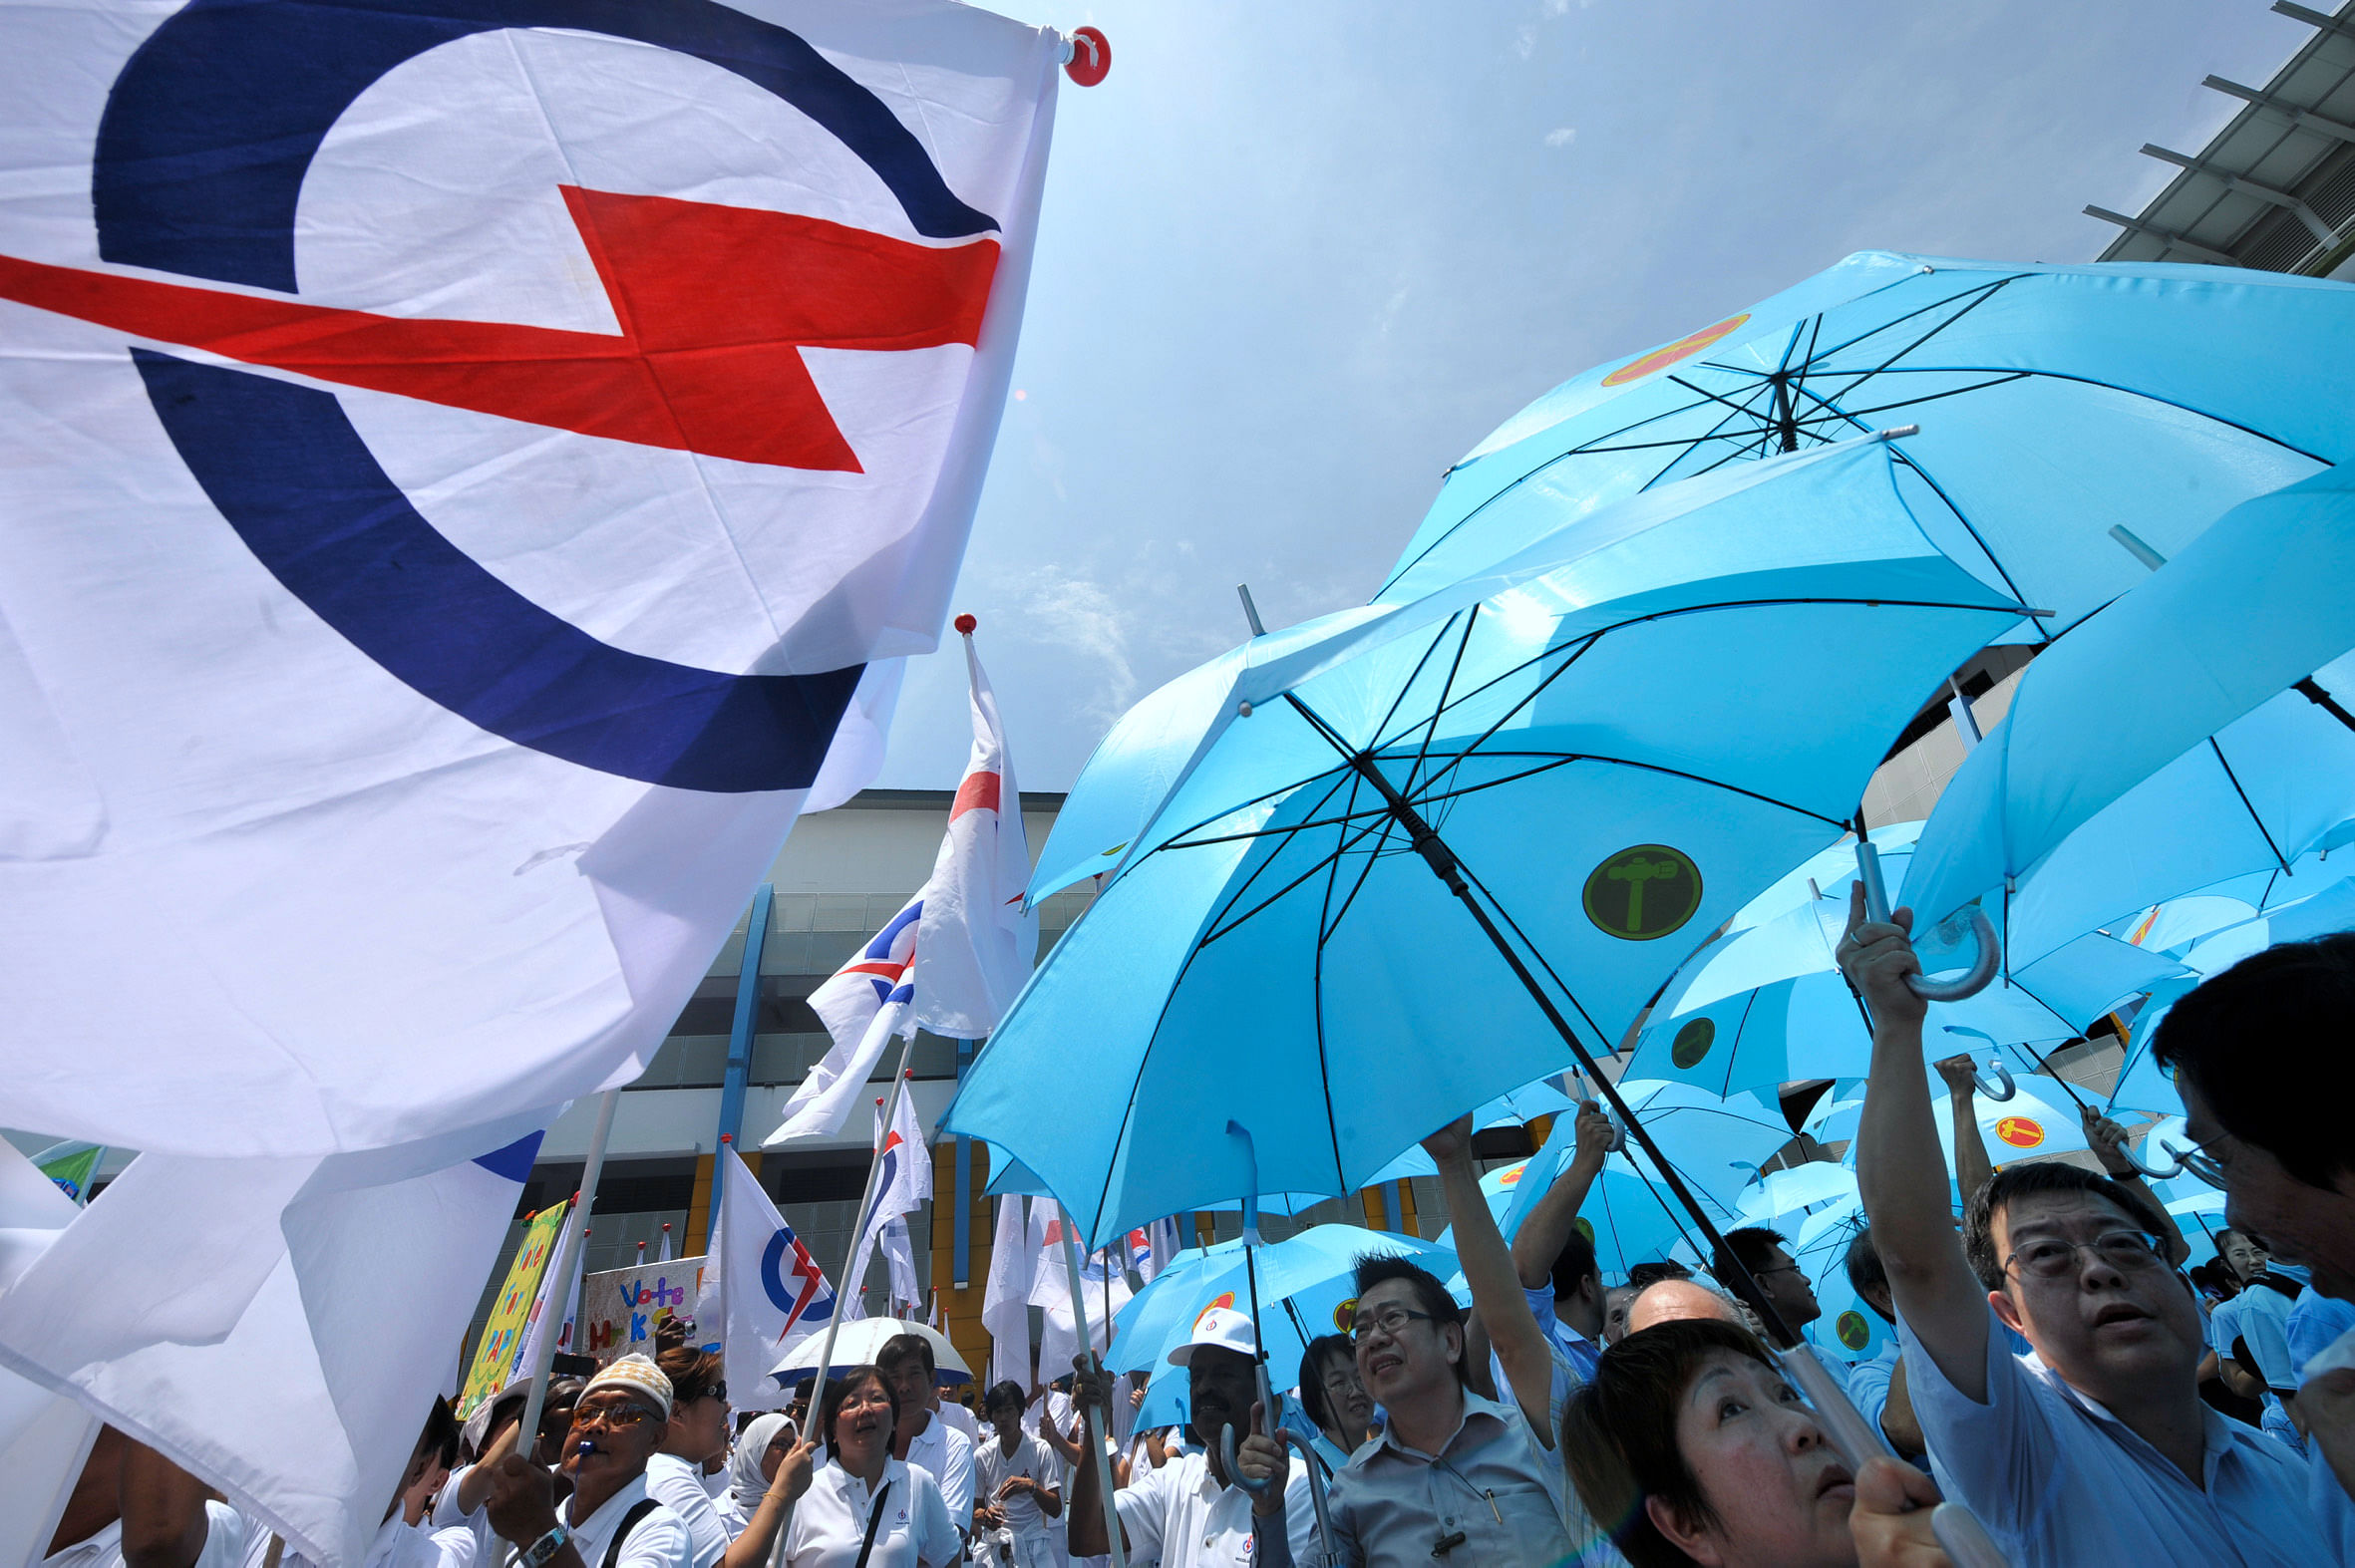 PAP: Activists say that the involvement of under-35-year-olds in newer technologies, like social media campaigning, was integral to the party's win. WP: There are rumblings of discontent among some segments of the party over the leadership's apparent